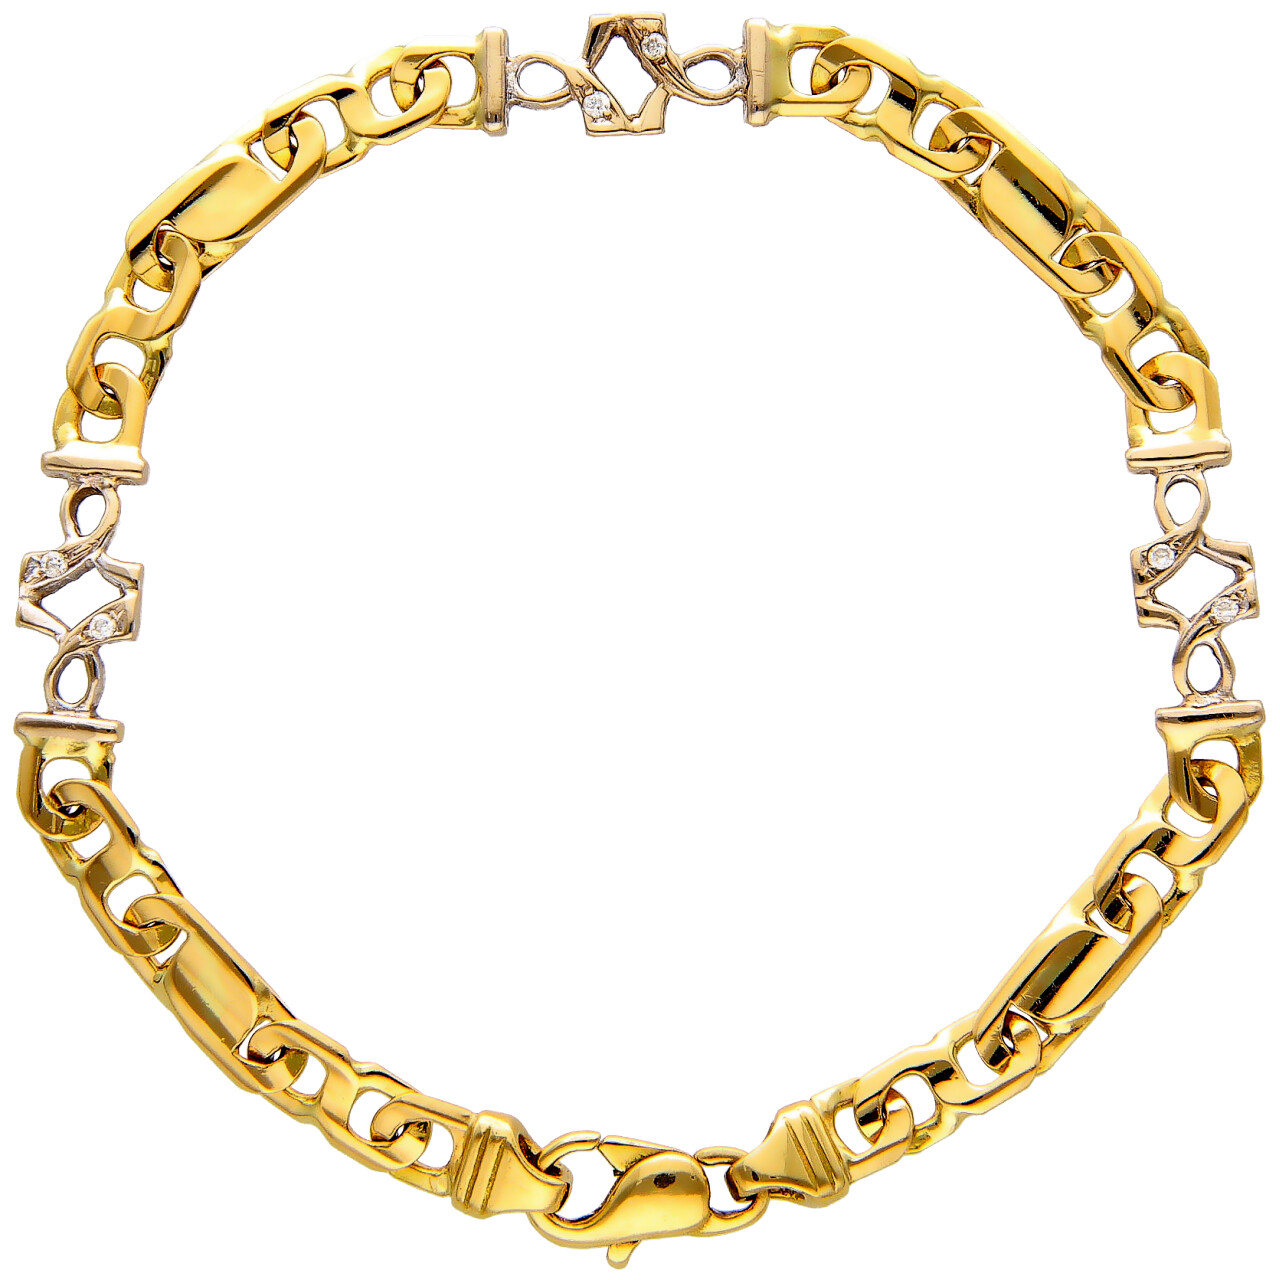 Yellow and White Gold Bracelet with Diamonds